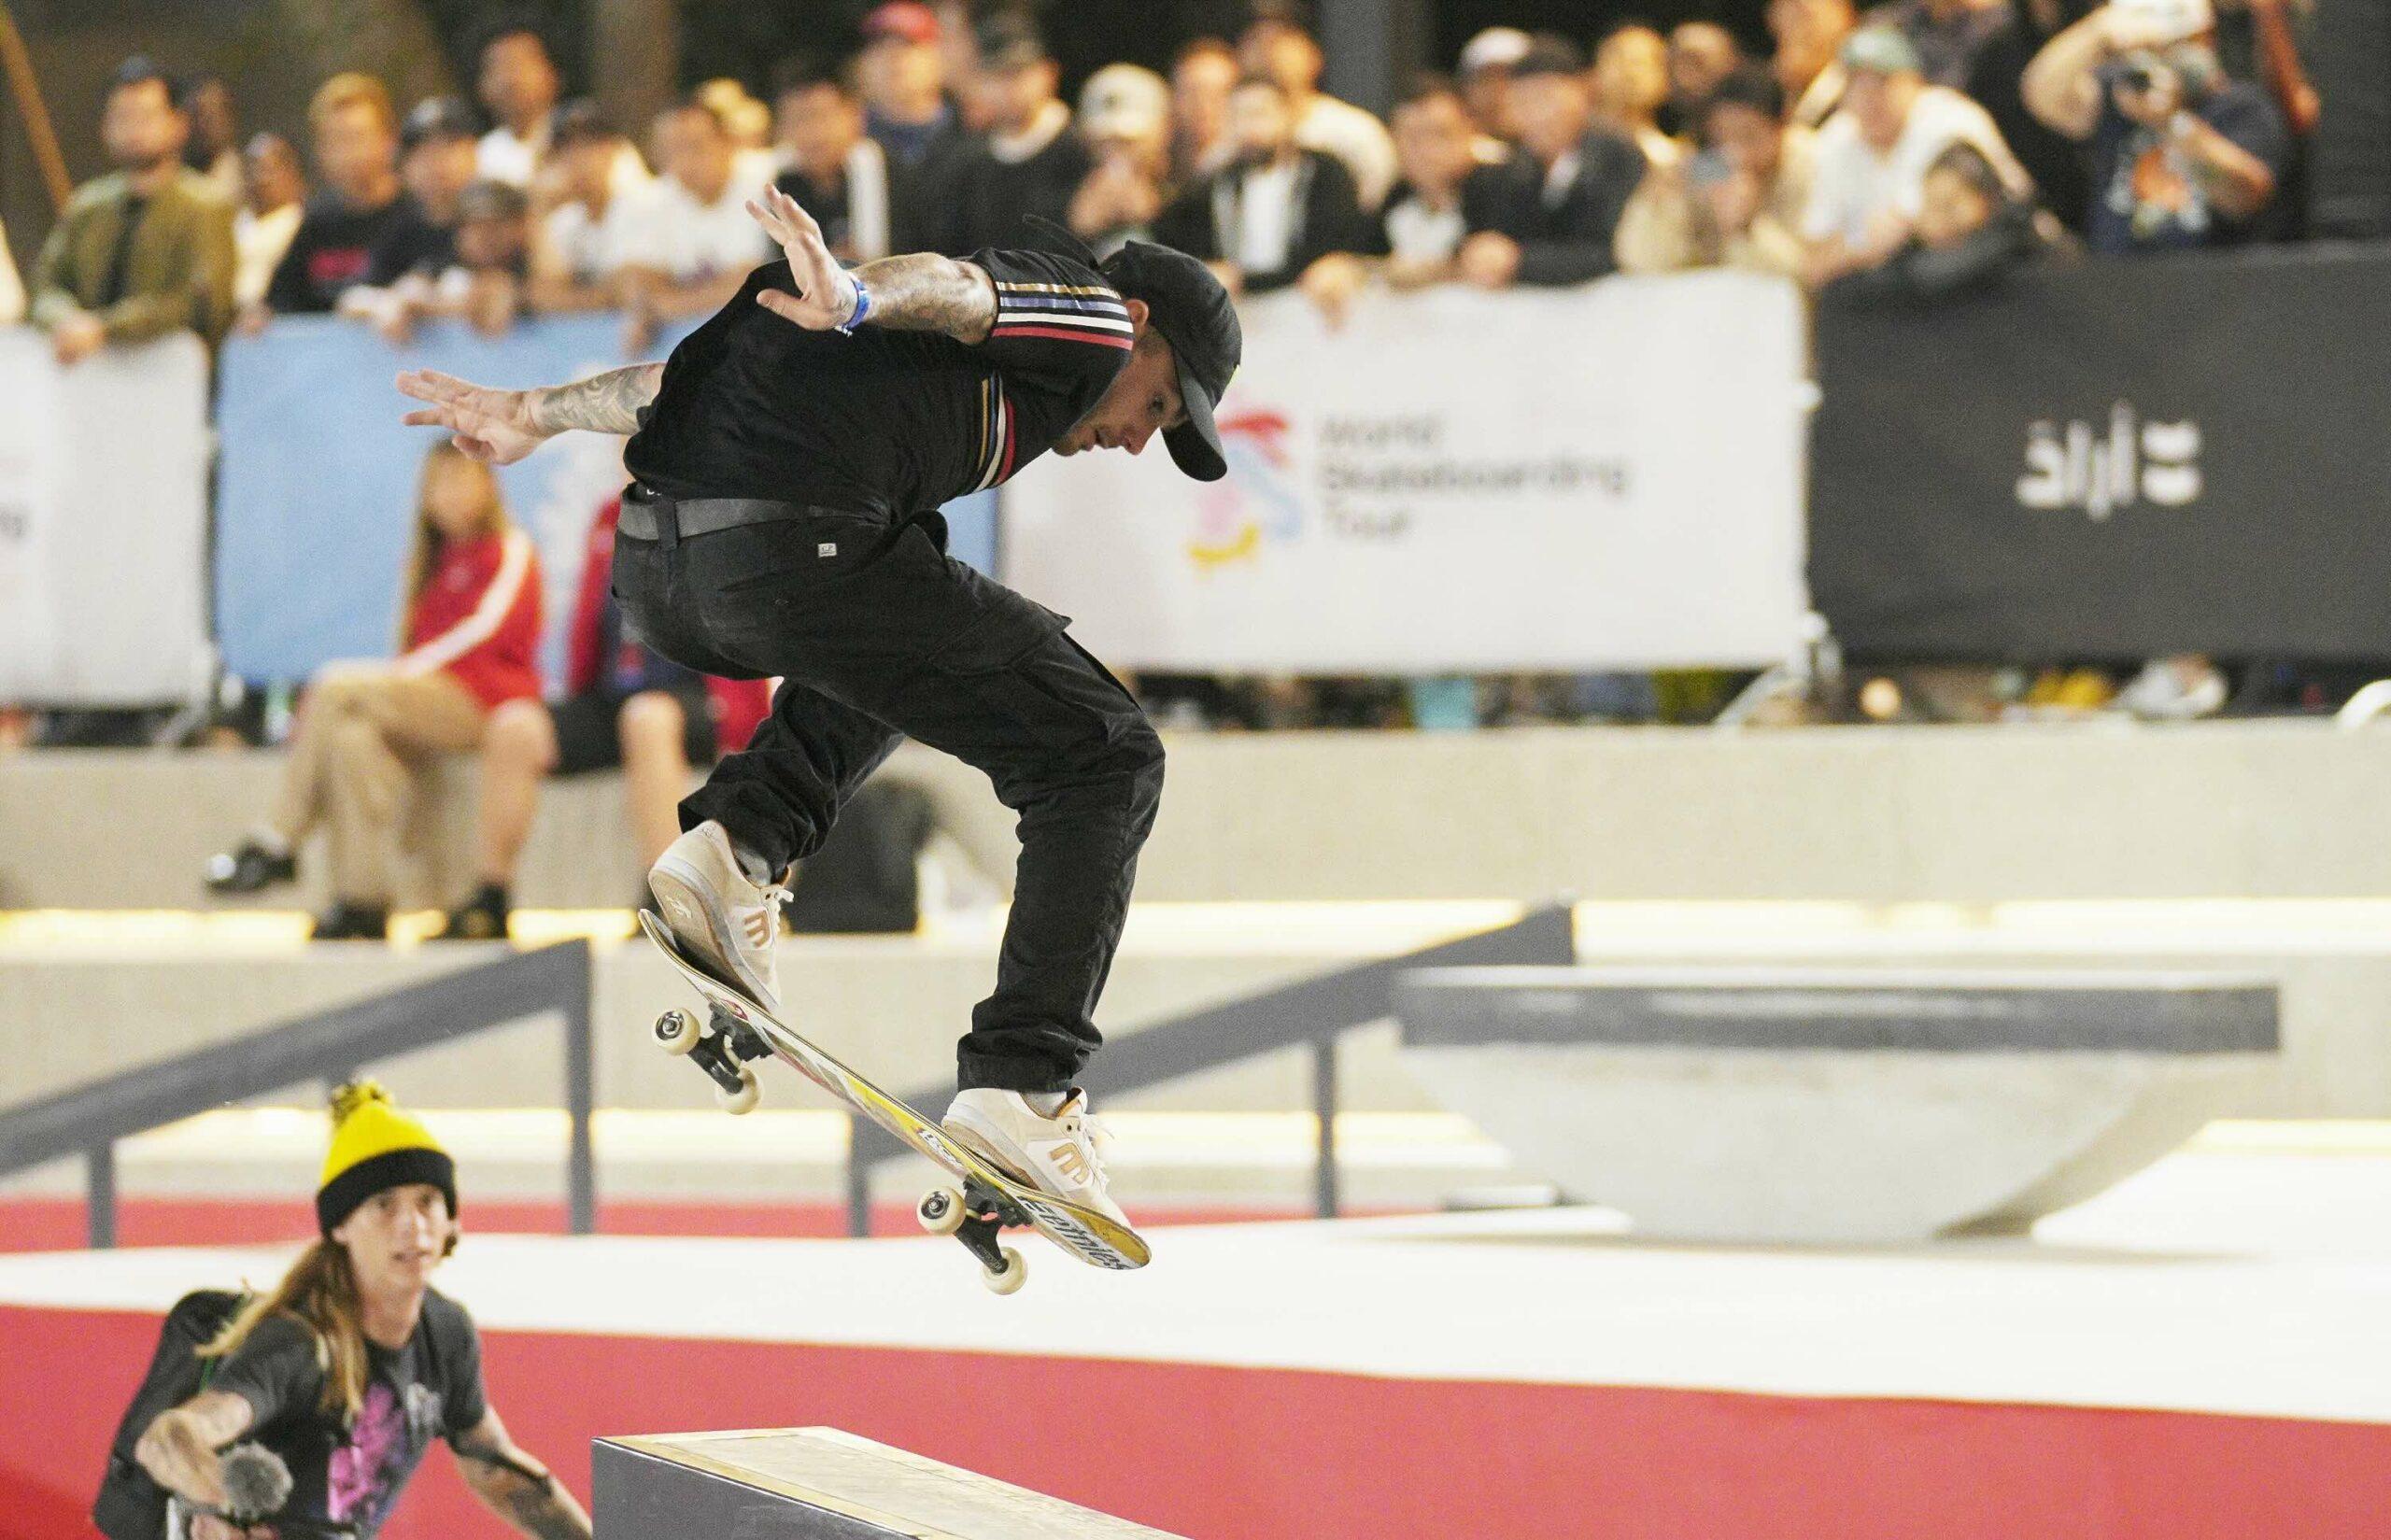 How to attend the World Skateboarding Tour in Dubai